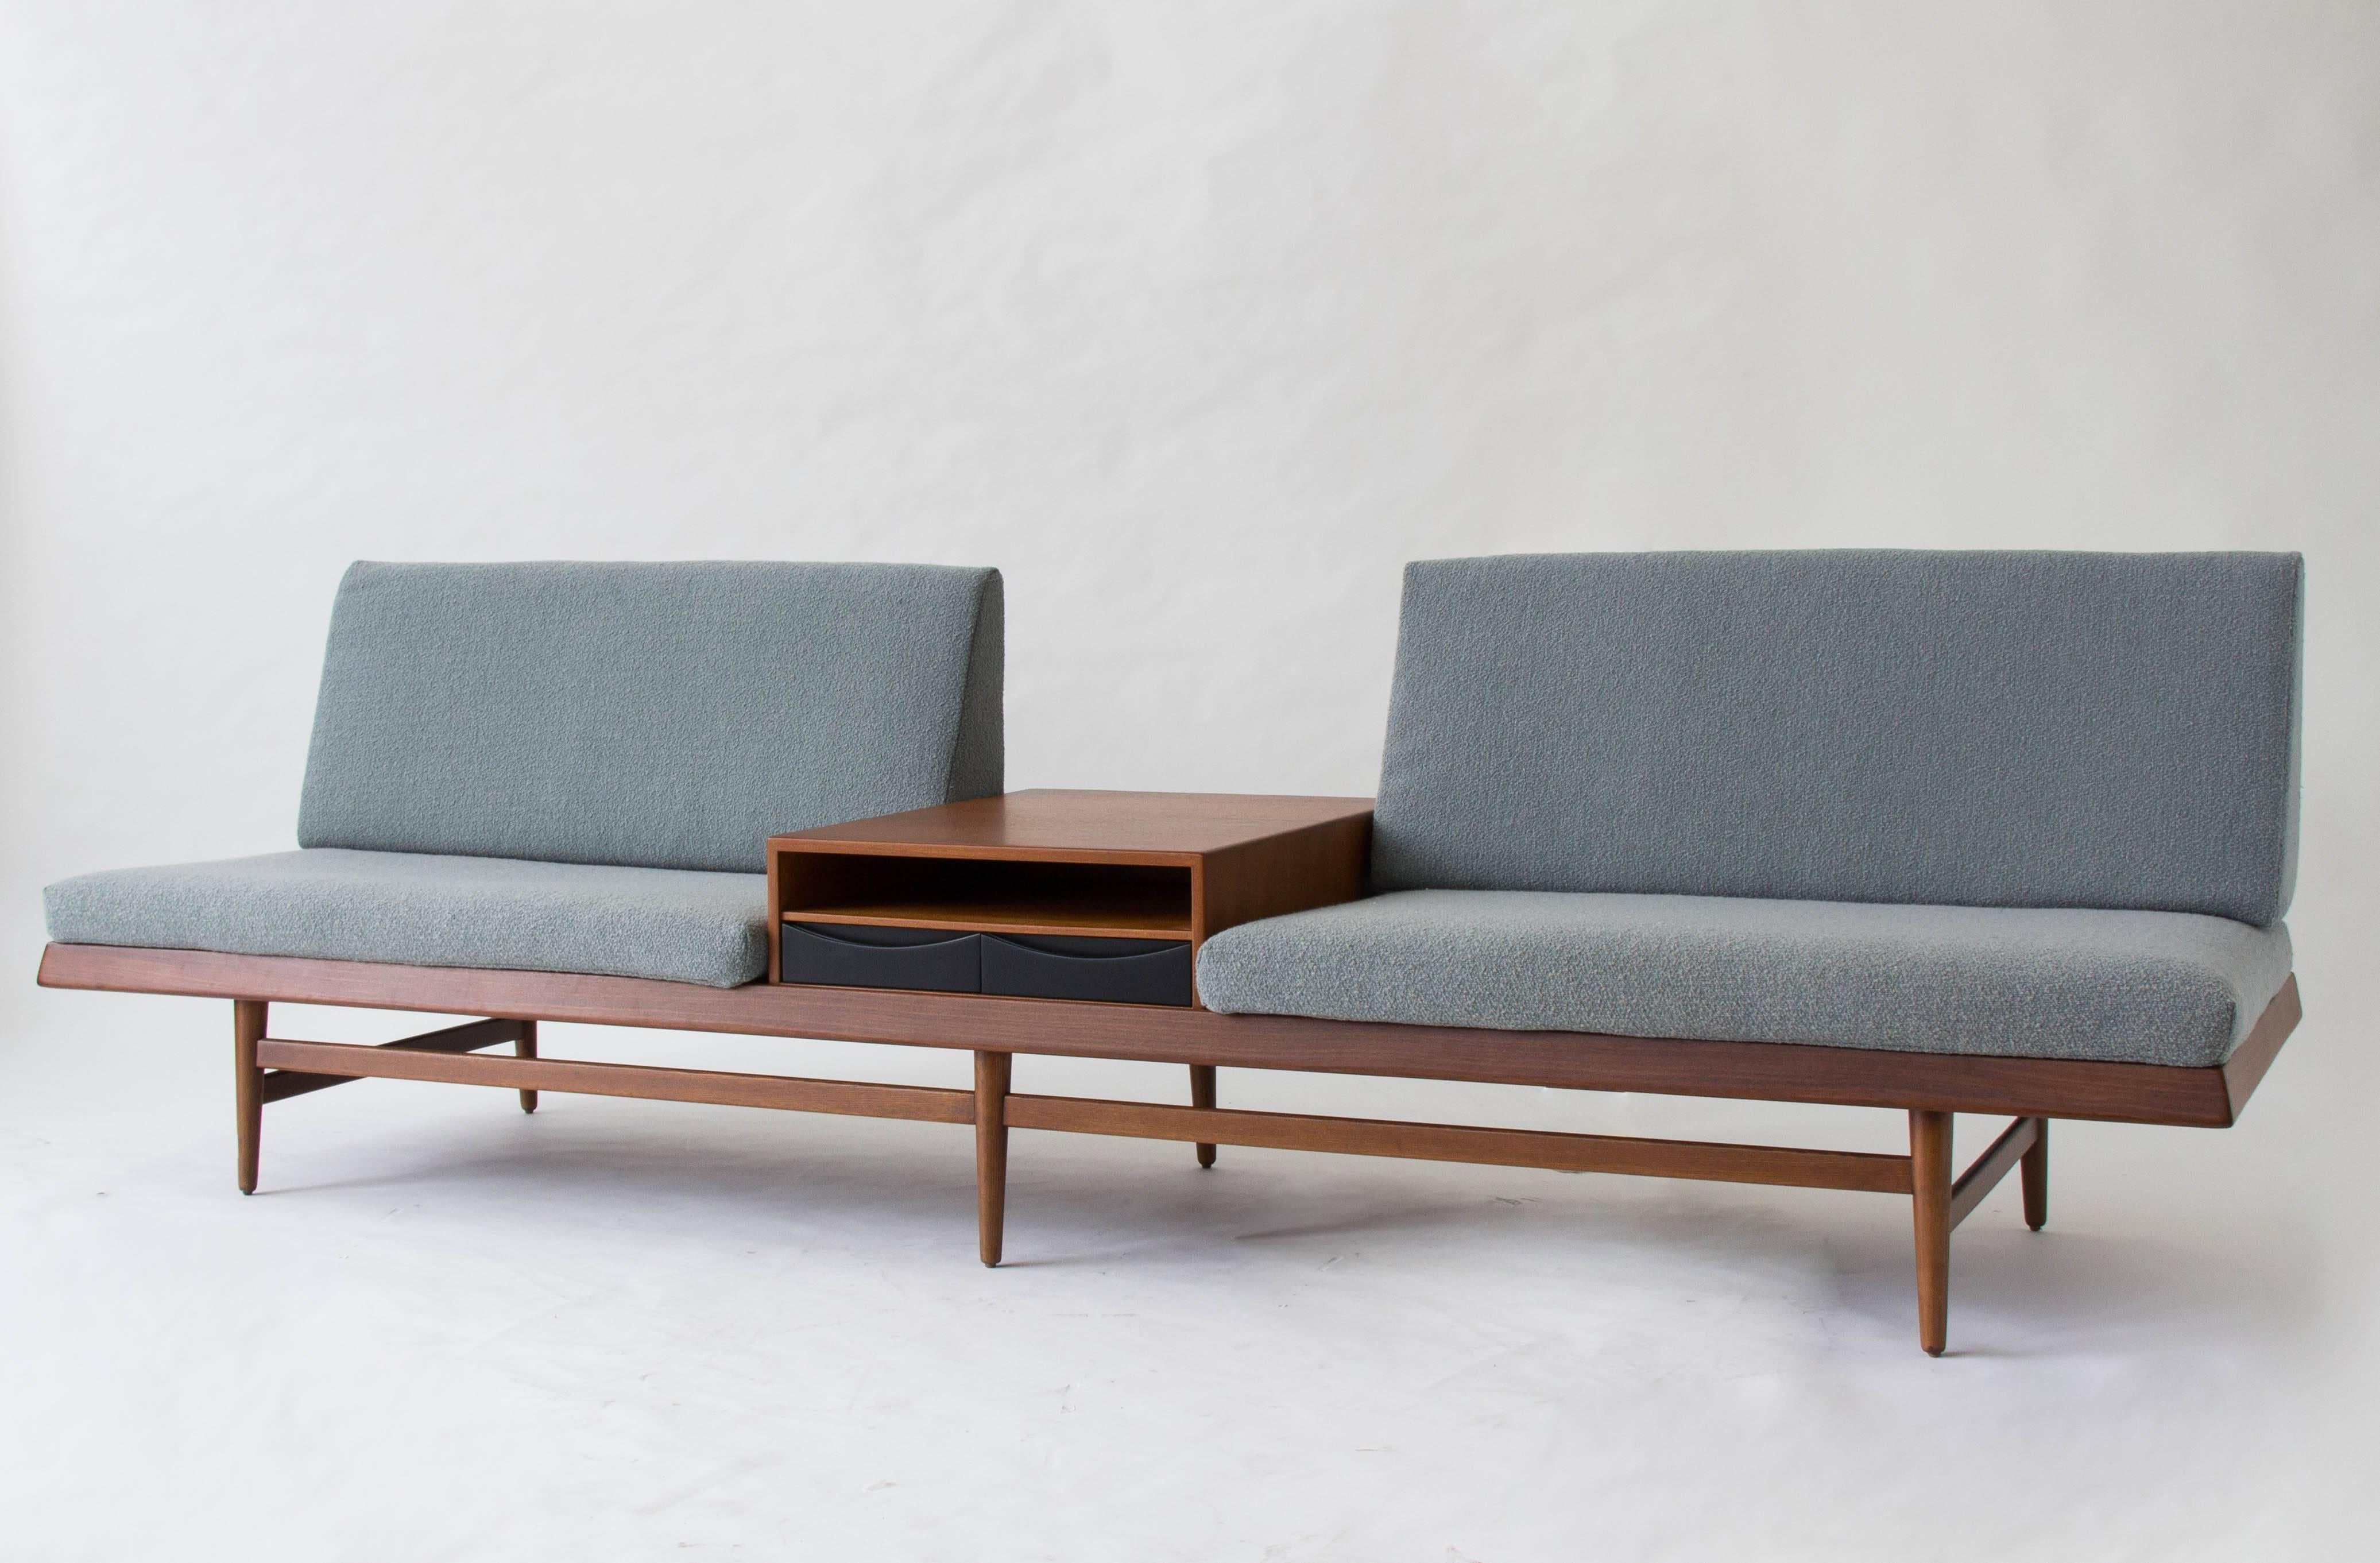 A rare modular sofa designed for Bruksbo by Torbjorn Afdal and produced by B.J. Hansen. The sofa has a teak frame with tapered legs. Two slatted back rests support the removable pyramid-shaped rear cushions. The sofa is fitted with a teak storage